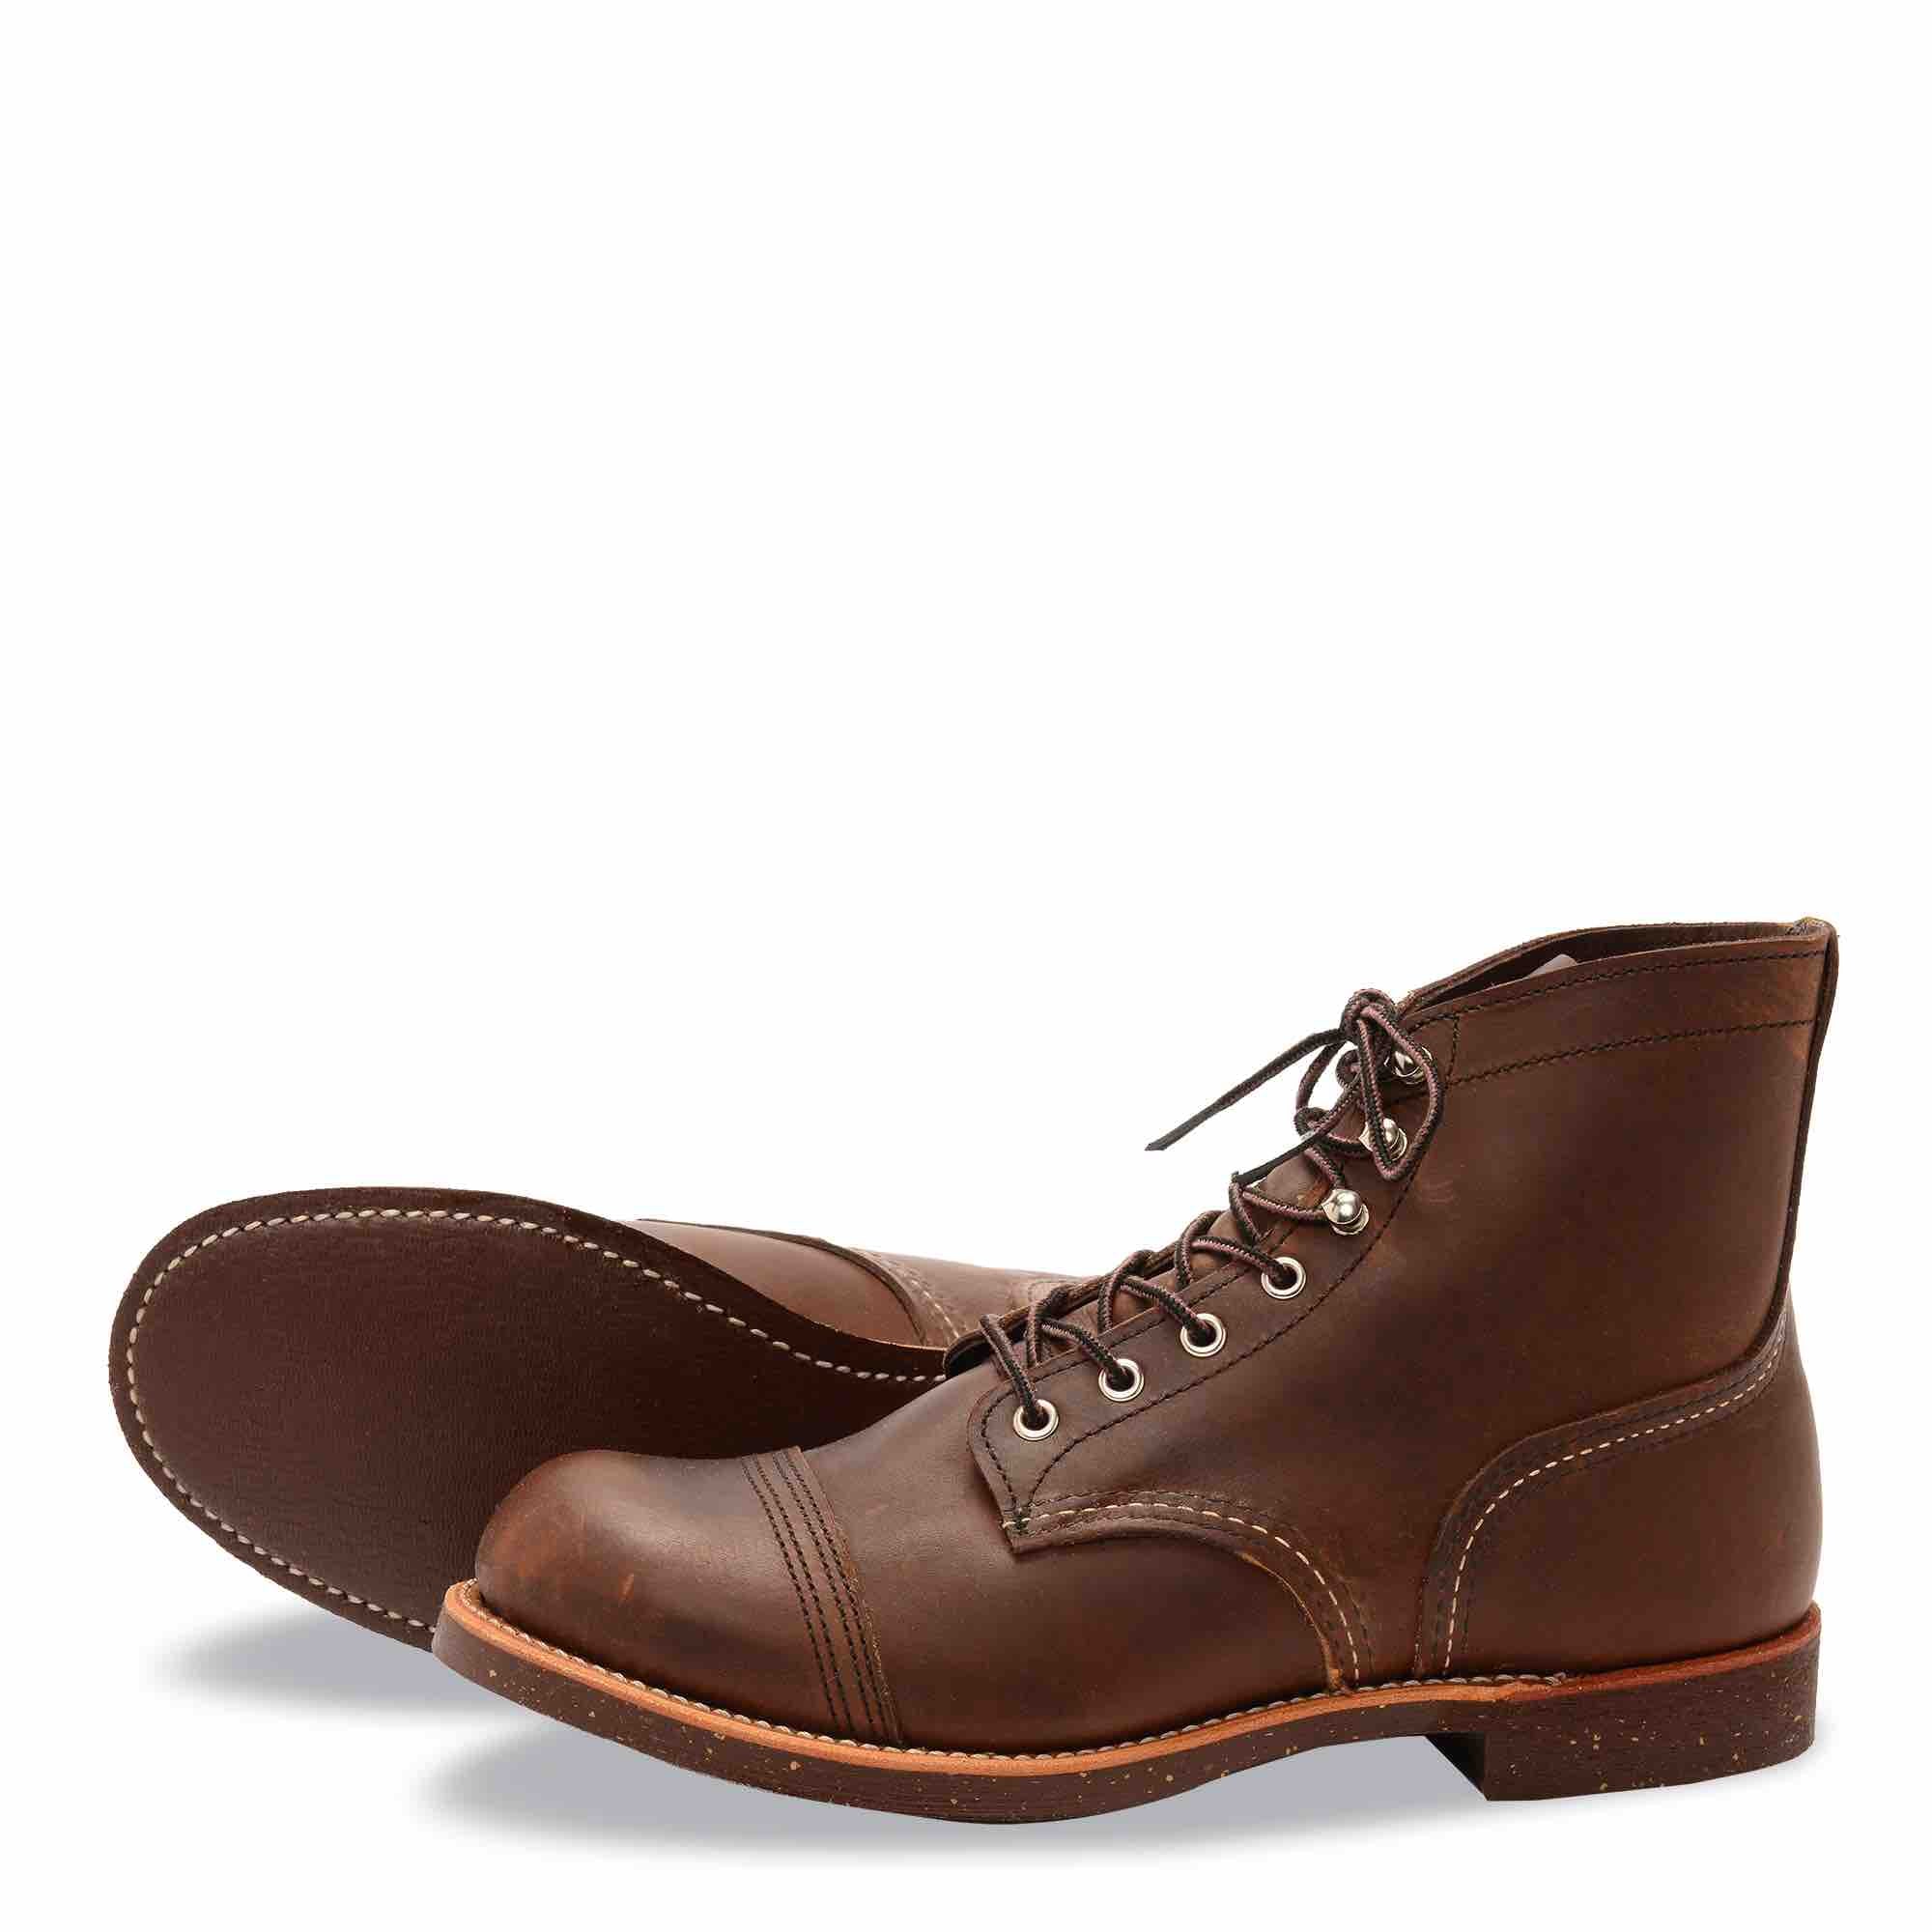 Red Wing - 8111 CORK SOLE - Iron Ranger 